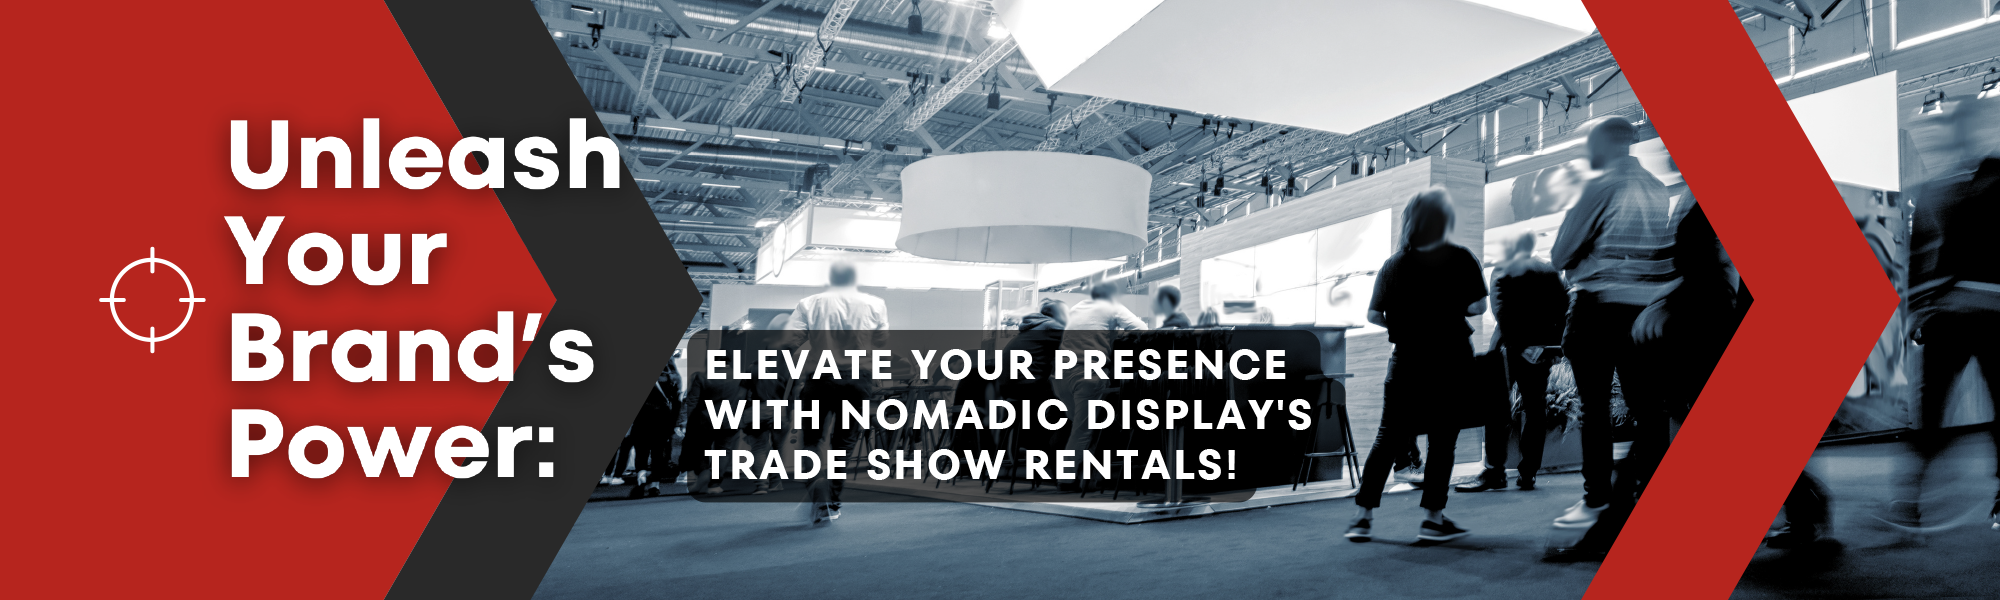 Unleash Your Brand's Power: Elevate Your Presence with Nomadic's Trade Show Rentals!